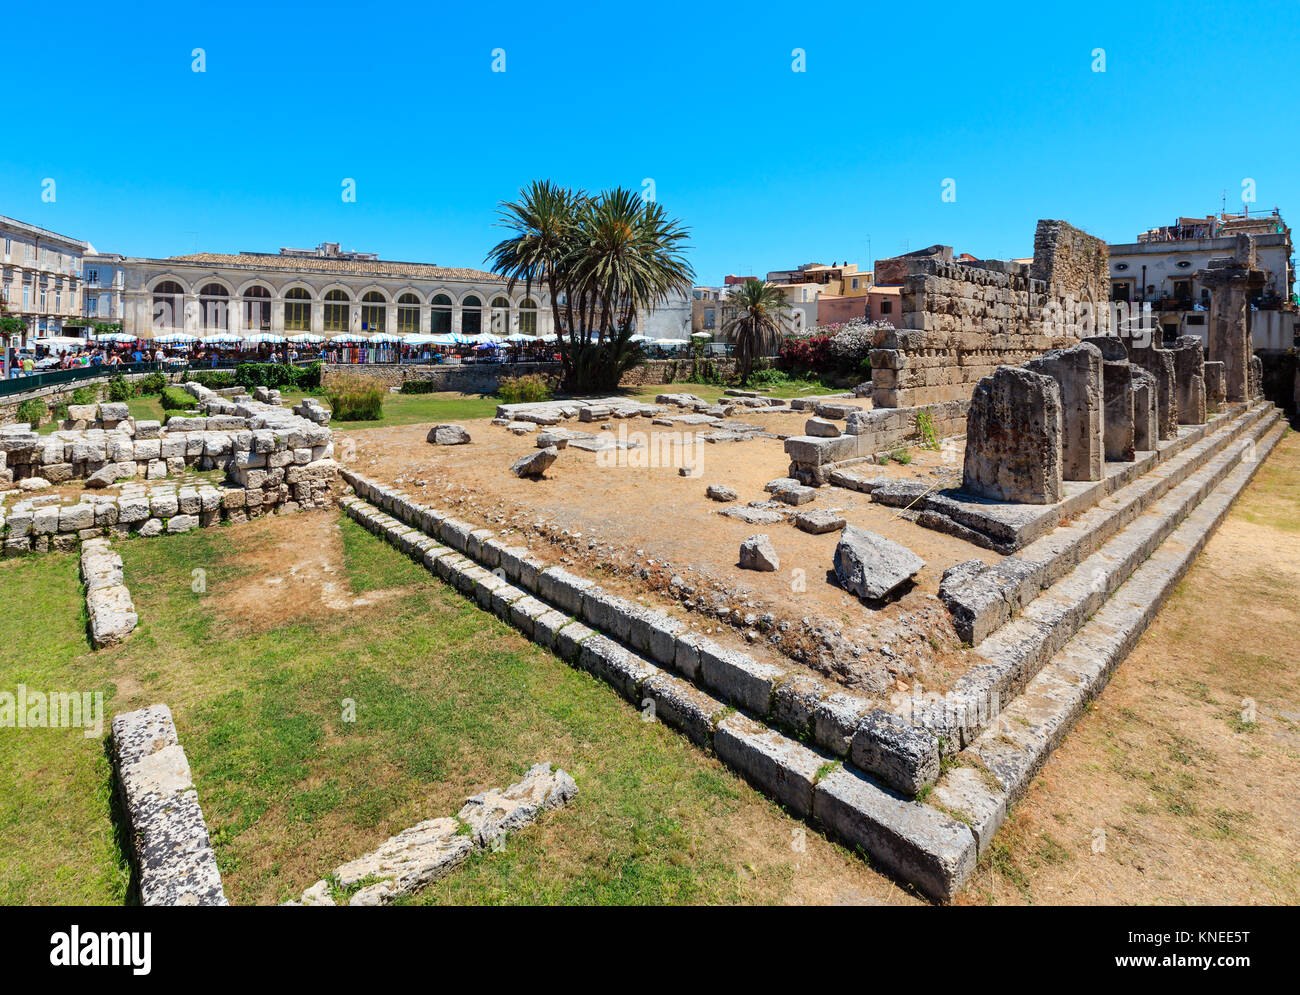 Ruins of Temple of Apollo (ancient Greek monuments on Ortygia island at city of Syracuse, Sicily, Italy). Beautiful travel photo of Sicily. People unr Stock Photo